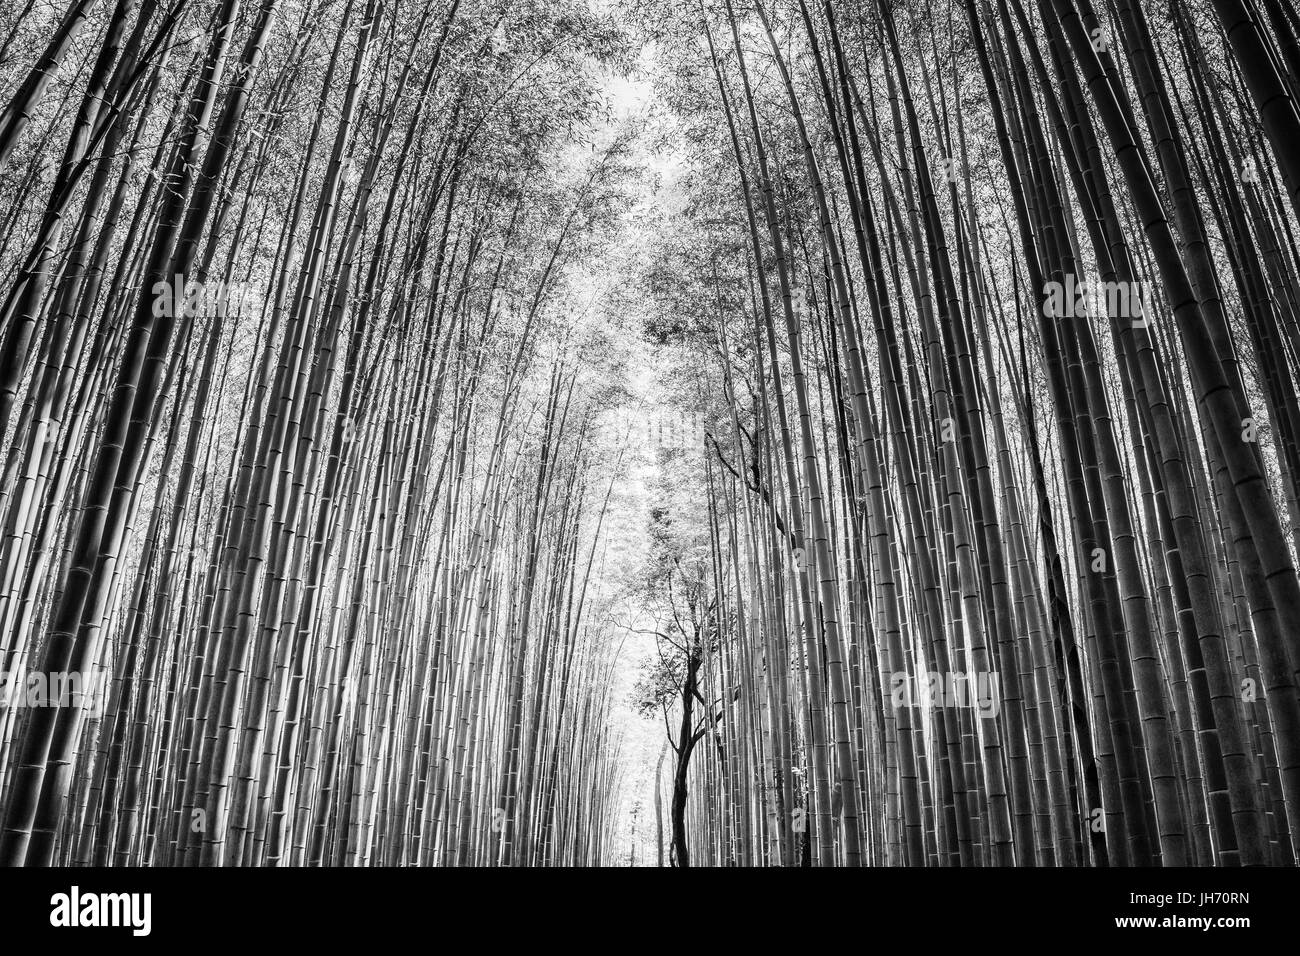 Japan grove japanese Black and White Stock Photos & Images - Alamy